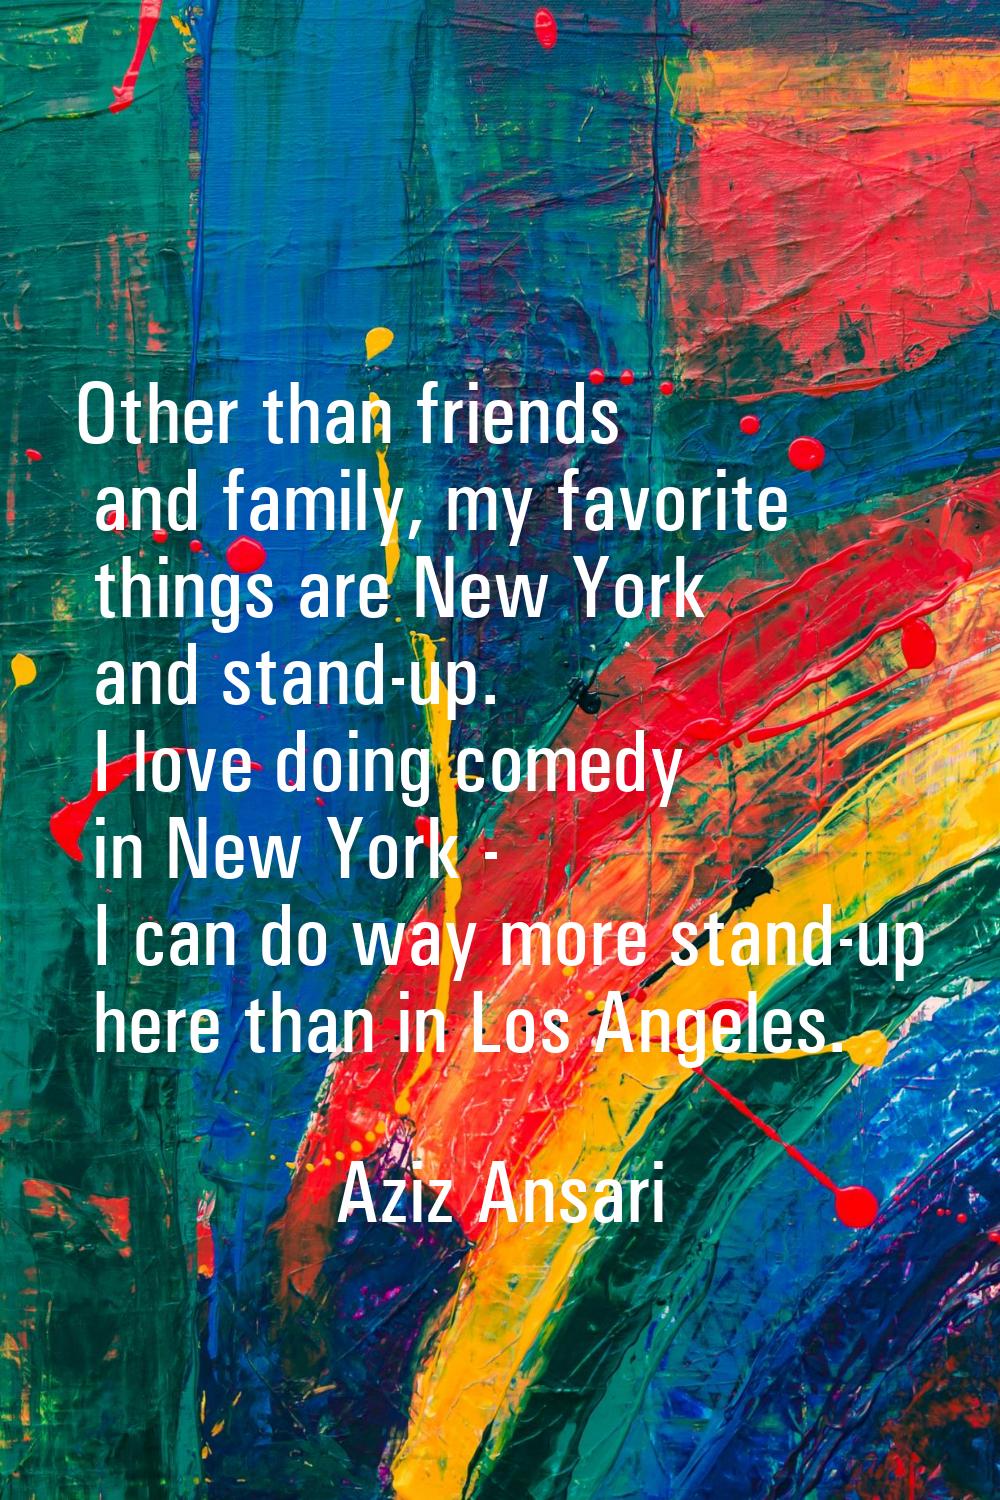 Other than friends and family, my favorite things are New York and stand-up. I love doing comedy in